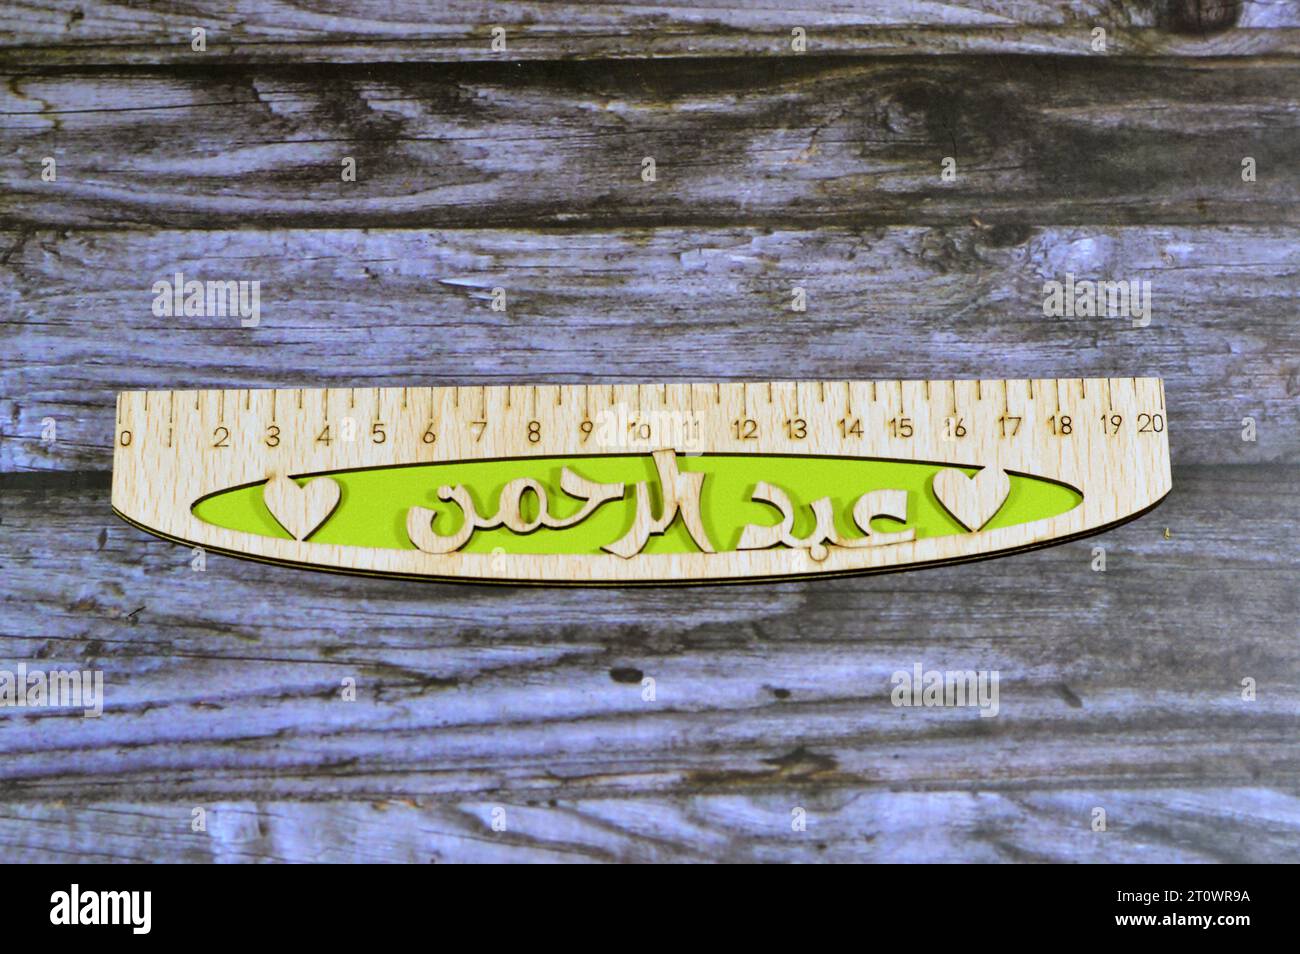 Translation of Arabic name on the ruler (AbdulRahman), Arabian common names on wooden rulers, a rule, line gauge, instrument used to make length measu Stock Photo